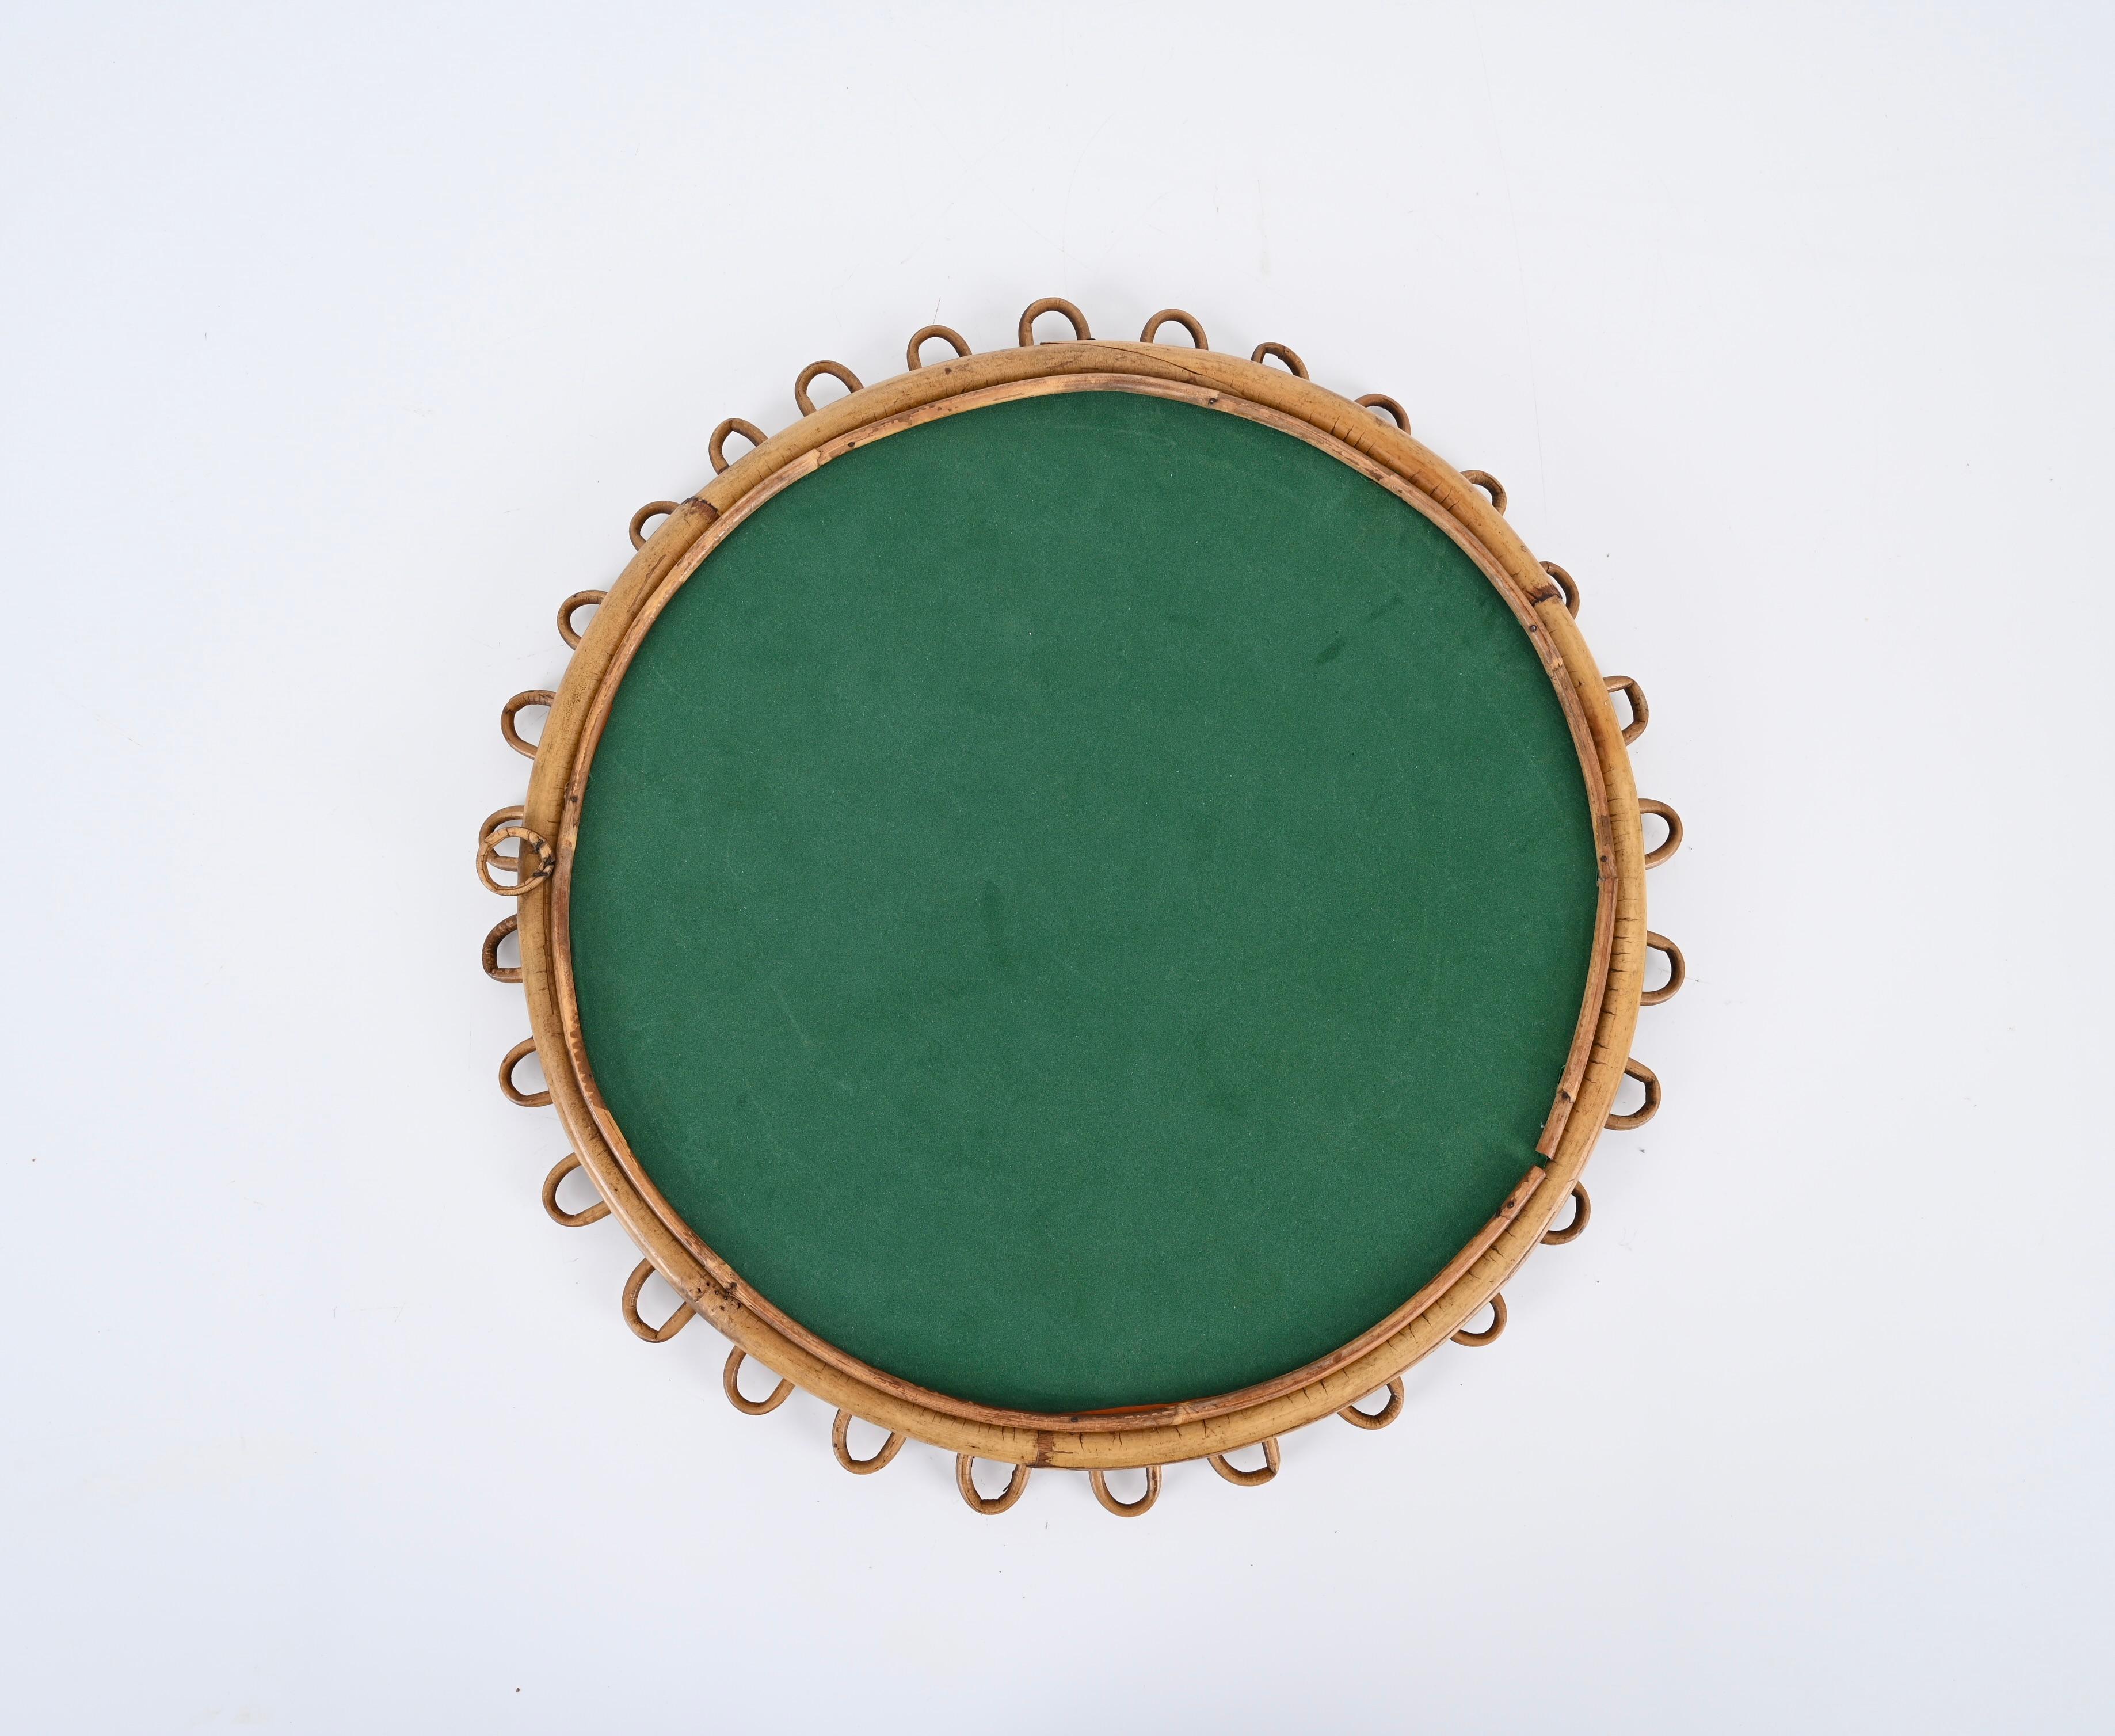 Midcentury French Riviera Rattan and Bamboo Italian Round Mirror, 1960s For Sale 5